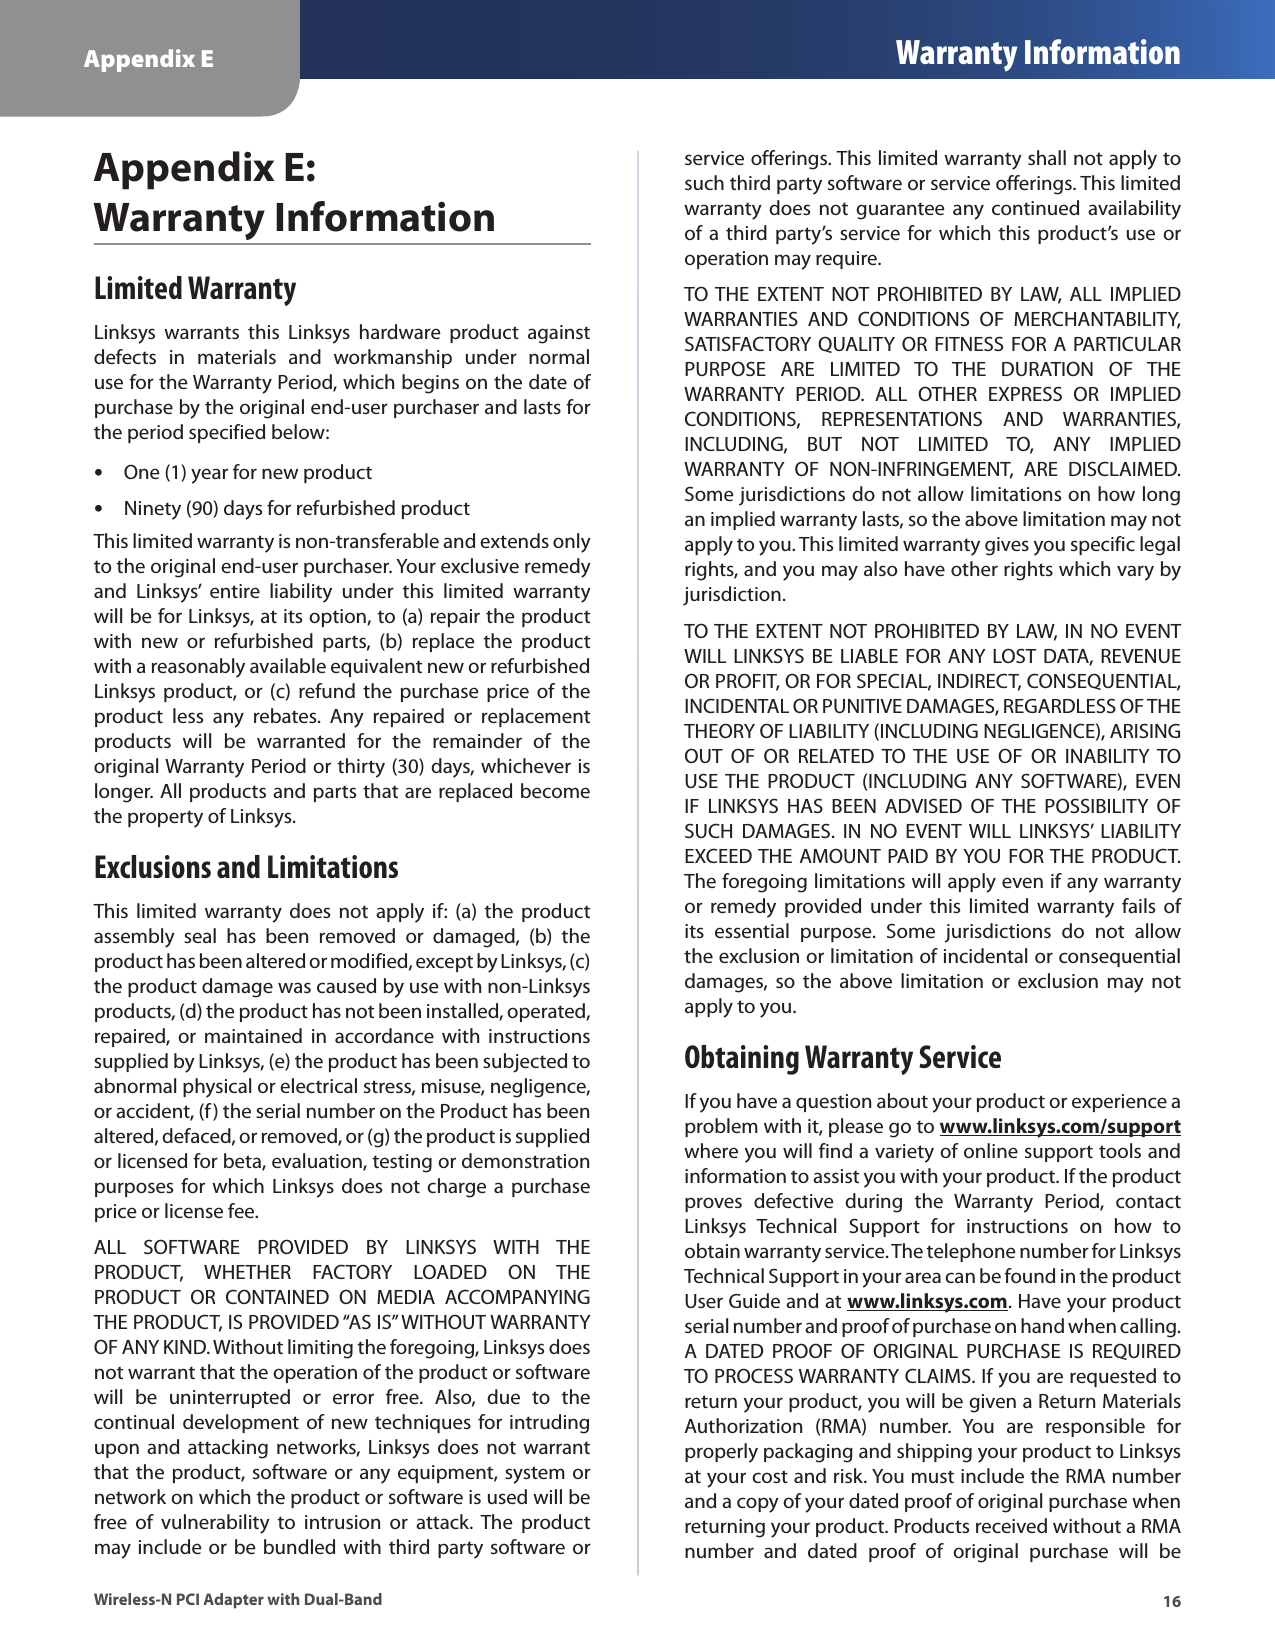 Appendix E Warranty Information16Wireless-N PCI Adapter with Dual-BandAppendix E:  Warranty InformationLimited WarrantyLinksys  warrants  this  Linksys  hardware  product  against defects  in  materials  and  workmanship  under  normal use for the Warranty Period, which begins on the date of purchase by the original end-user purchaser and lasts for the period specified below:One (1) year for new product •Ninety (90) days for refurbished product •This limited warranty is non-transferable and extends only to the original end-user purchaser. Your exclusive remedy and  Linksys’  entire  liability  under  this  limited  warranty will be for Linksys, at its option, to (a) repair the product with  new  or  refurbished  parts,  (b)  replace  the  product with a reasonably available equivalent new or refurbished Linksys product,  or (c)  refund the  purchase price  of  the product  less  any  rebates.  Any  repaired  or  replacement products  will  be  warranted  for  the  remainder  of  the original Warranty Period or thirty (30) days, whichever is longer. All products and parts that are replaced become the property of Linksys.Exclusions and LimitationsThis  limited  warranty  does  not  apply  if:  (a) the  product assembly  seal  has  been  removed  or  damaged,  (b)  the product has been altered or modified, except by Linksys, (c) the product damage was caused by use with non-Linksys products, (d) the product has not been installed, operated, repaired,  or  maintained  in  accordance  with  instructions supplied by Linksys, (e) the product has been subjected to abnormal physical or electrical stress, misuse, negligence, or accident, (f) the serial number on the Product has been altered, defaced, or removed, or (g) the product is supplied or licensed for beta, evaluation, testing or demonstration purposes for which  Linksys does not  charge  a purchase price or license fee.ALL  SOFTWARE  PROVIDED  BY  LINKSYS  WITH  THE PRODUCT,  WHETHER  FACTORY  LOADED  ON  THE PRODUCT  OR  CONTAINED  ON  MEDIA  ACCOMPANYING THE PRODUCT, IS PROVIDED “AS IS” WITHOUT WARRANTY OF ANY KIND. Without limiting the foregoing, Linksys does not warrant that the operation of the product or software will  be  uninterrupted  or  error  free.  Also,  due  to  the continual development of new techniques for intruding upon and  attacking  networks, Linksys does  not warrant that the product, software or any equipment, system or network on which the product or software is used will be free  of  vulnerability  to  intrusion  or  attack.  The  product may include or be bundled with third party software or service offerings. This limited warranty shall not apply to such third party software or service offerings. This limited warranty  does  not  guarantee  any  continued  availability of a  third party’s  service  for  which this product’s use  or operation may require. TO THE  EXTENT  NOT  PROHIBITED  BY  LAW,  ALL  IMPLIED WARRANTIES  AND  CONDITIONS  OF  MERCHANTABILITY, SATISFACTORY QUALITY OR FITNESS FOR A  PARTICULAR PURPOSE  ARE  LIMITED  TO  THE  DURATION  OF  THE WARRANTY  PERIOD.  ALL  OTHER  EXPRESS  OR  IMPLIED CONDITIONS,  REPRESENTATIONS  AND  WARRANTIES, INCLUDING,  BUT  NOT  LIMITED  TO,  ANY  IMPLIED WARRANTY  OF  NON-INFRINGEMENT,  ARE  DISCLAIMED. Some jurisdictions do not allow limitations on how long an implied warranty lasts, so the above limitation may not apply to you. This limited warranty gives you specific legal rights, and you may also have other rights which vary by jurisdiction.TO THE  EXTENT NOT PROHIBITED BY LAW, IN NO EVENT WILL LINKSYS BE LIABLE FOR ANY LOST DATA, REVENUE OR PROFIT, OR FOR SPECIAL, INDIRECT, CONSEQUENTIAL, INCIDENTAL OR PUNITIVE DAMAGES, REGARDLESS OF THE THEORY OF LIABILITY (INCLUDING NEGLIGENCE), ARISING OUT  OF  OR  RELATED  TO  THE  USE  OF  OR  INABILITY  TO USE THE  PRODUCT  (INCLUDING  ANY  SOFTWARE),  EVEN IF  LINKSYS  HAS  BEEN  ADVISED  OF THE  POSSIBILITY  OF SUCH  DAMAGES.  IN  NO  EVENT WILL  LINKSYS’  LIABILITY EXCEED THE  AMOUNT PAID  BY YOU FOR THE PRODUCT. The foregoing limitations will apply even if any warranty or  remedy provided  under  this  limited  warranty  fails of its  essential  purpose.  Some  jurisdictions  do  not  allow the exclusion or limitation of incidental or consequential damages,  so  the  above  limitation  or  exclusion  may  not apply to you.Obtaining Warranty ServiceIf you have a question about your product or experience a problem with it, please go to www.linksys.com/support where you will find a variety of online support tools and information to assist you with your product. If the product proves  defective  during  the  Warranty  Period,  contact Linksys  Technical  Support  for  instructions  on  how  to obtain warranty service. The telephone number for Linksys Technical Support in your area can be found in the product User Guide and at www.linksys.com. Have your product serial number and proof of purchase on hand when calling. A  DATED  PROOF  OF  ORIGINAL  PURCHASE  IS  REQUIRED TO PROCESS WARRANTY CLAIMS. If you are requested to return your product, you will be given a Return Materials Authorization  (RMA)  number.  You  are  responsible  for properly packaging and shipping your product to Linksys at your cost and risk. You must include the RMA number and a copy of your dated proof of original purchase when returning your product. Products received without a RMA number  and  dated  proof  of  original  purchase  will  be 